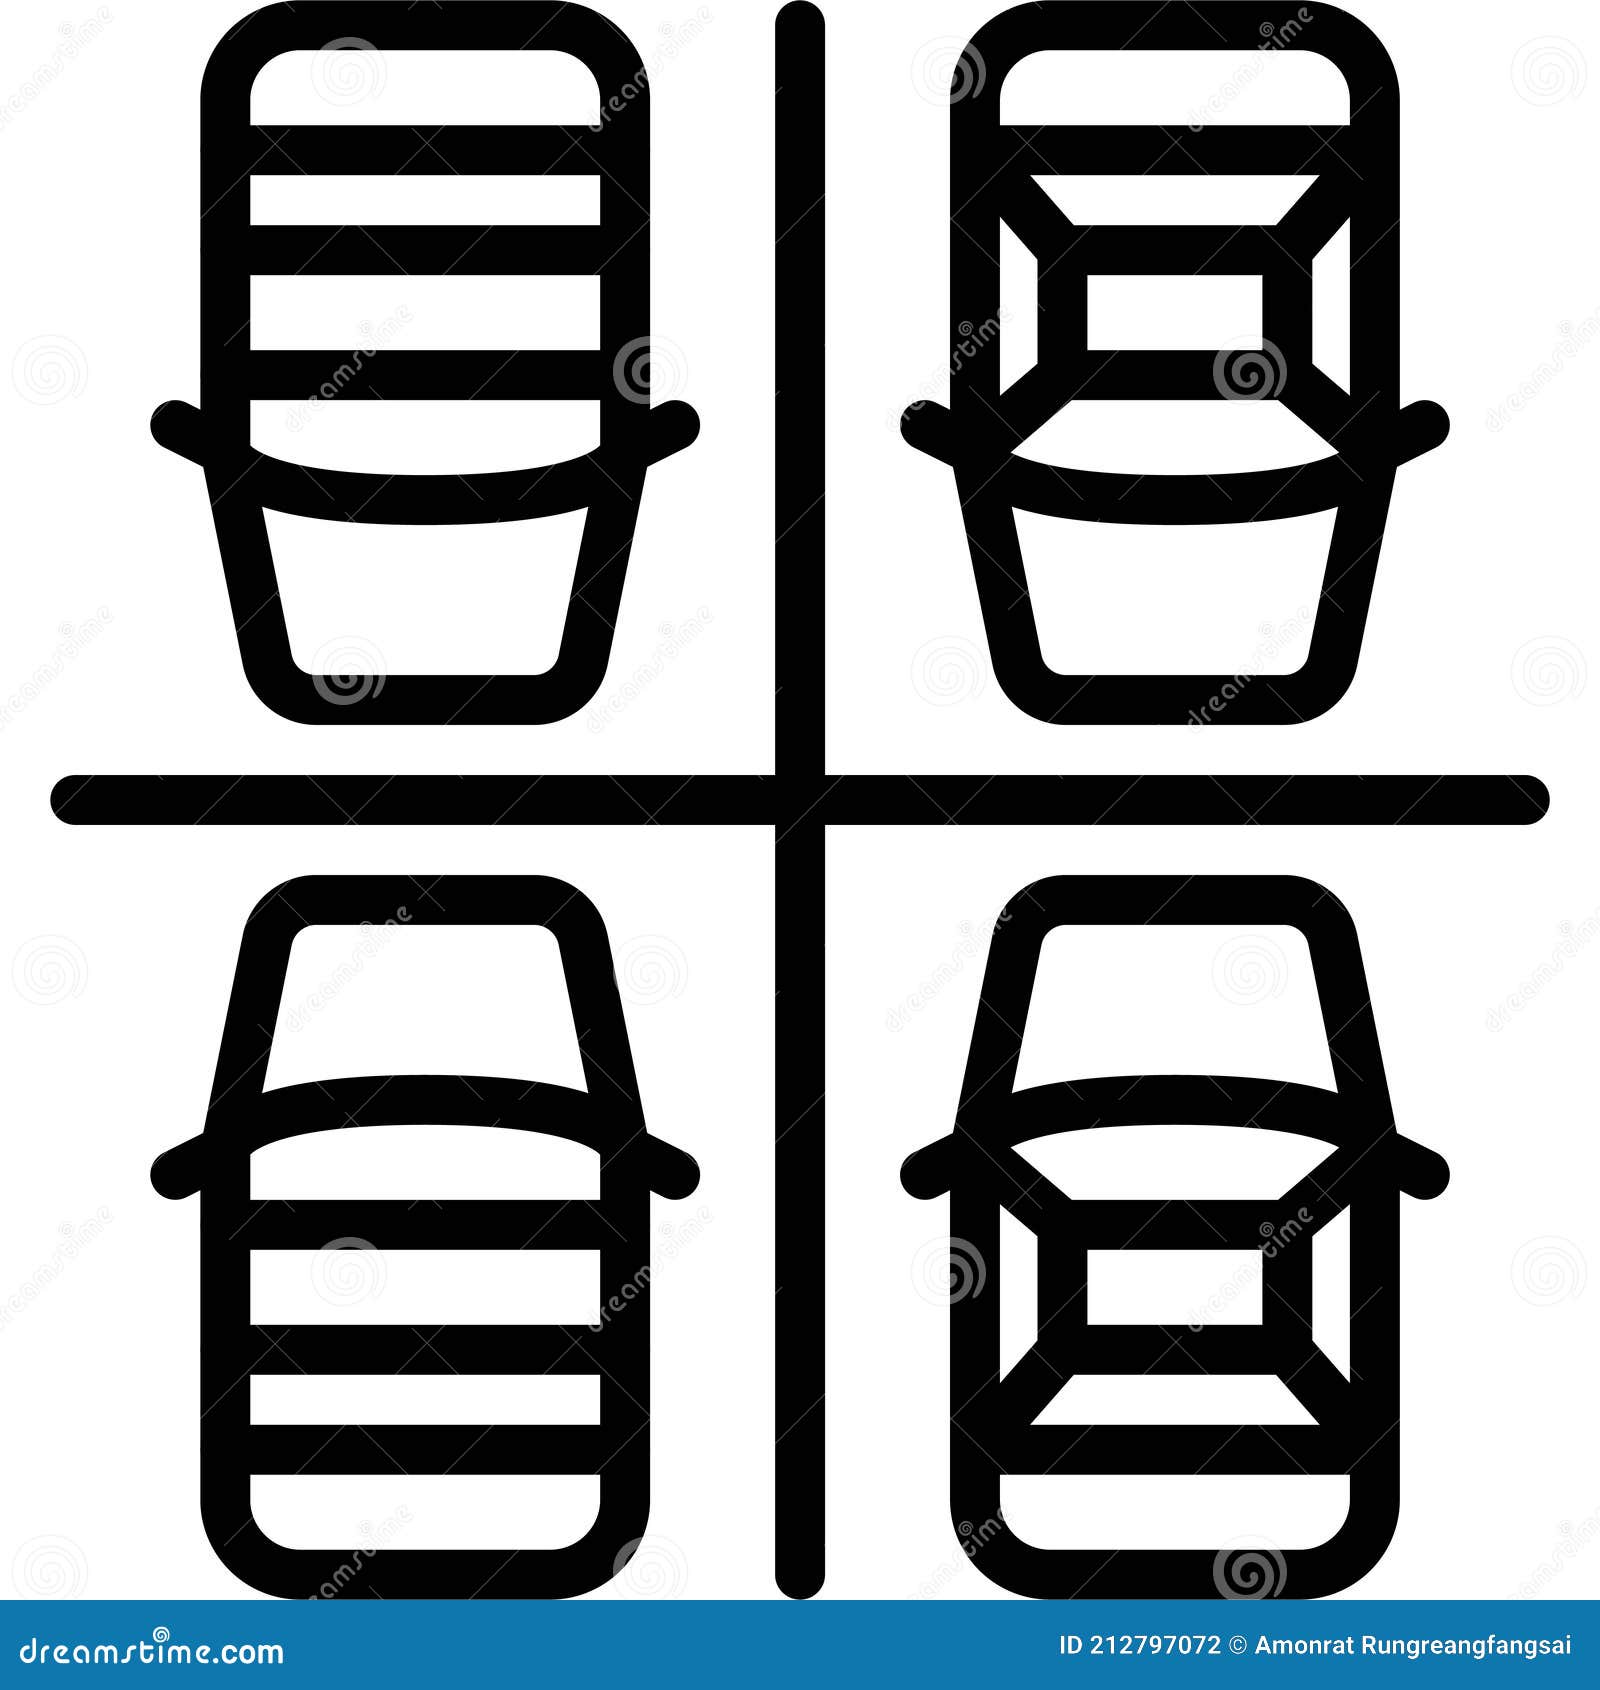 Full Parking Lot Icon, Parking Lot Related Vector Stock Vector